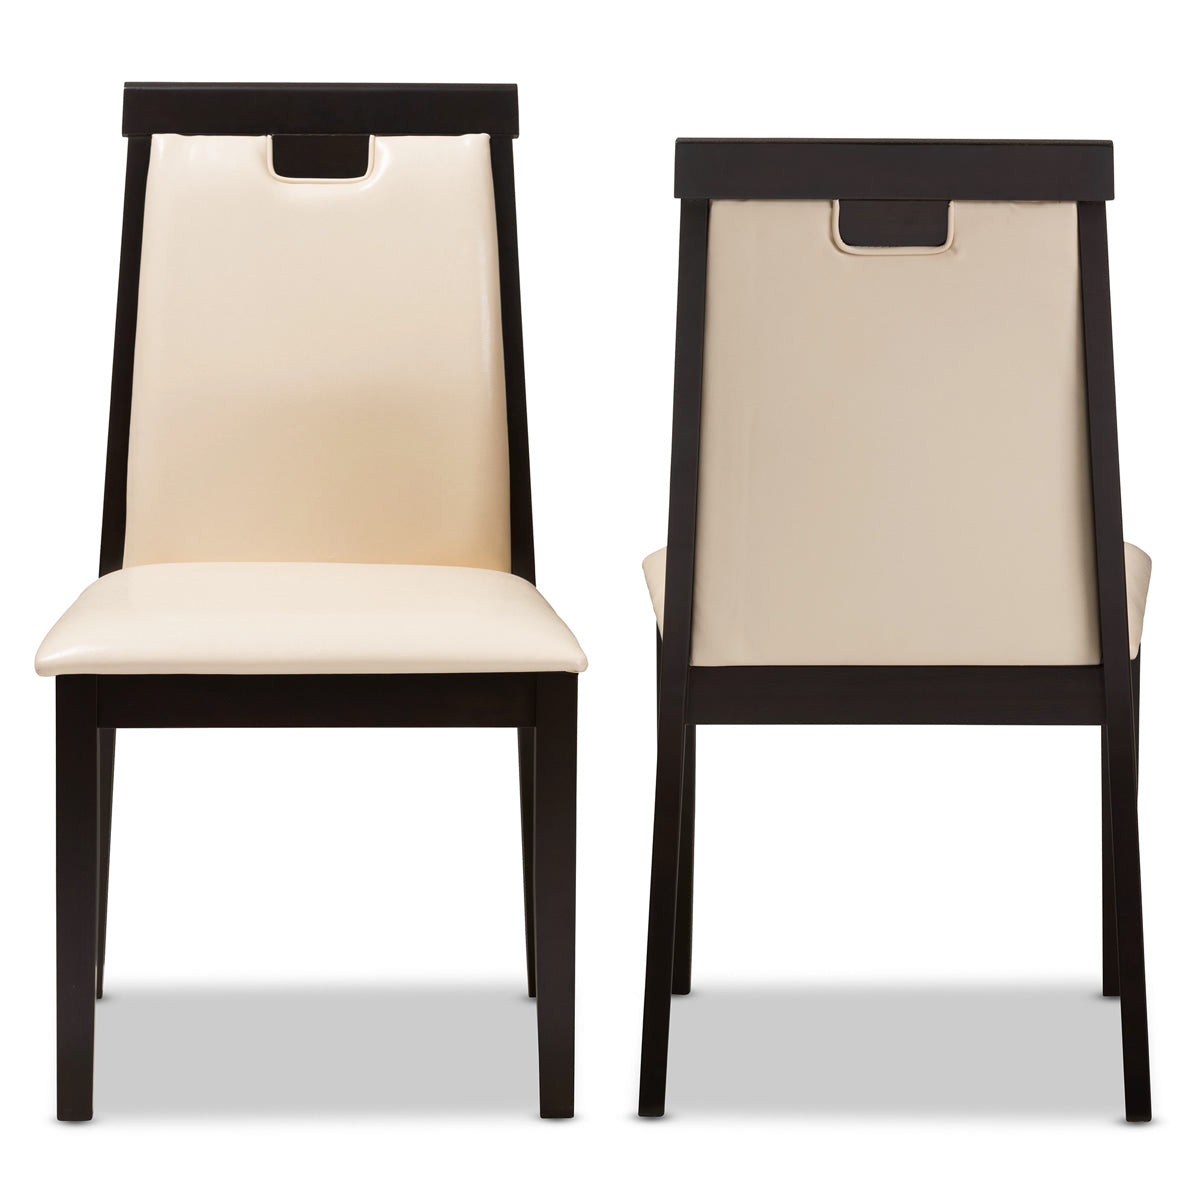 Baxton Studio Evelyn Modern and Contemporary Beige Faux Leather Upholstered and Dark Brown Finished Dining Chair (Set of 2) Baxton Studio-dining chair-Minimal And Modern - 2